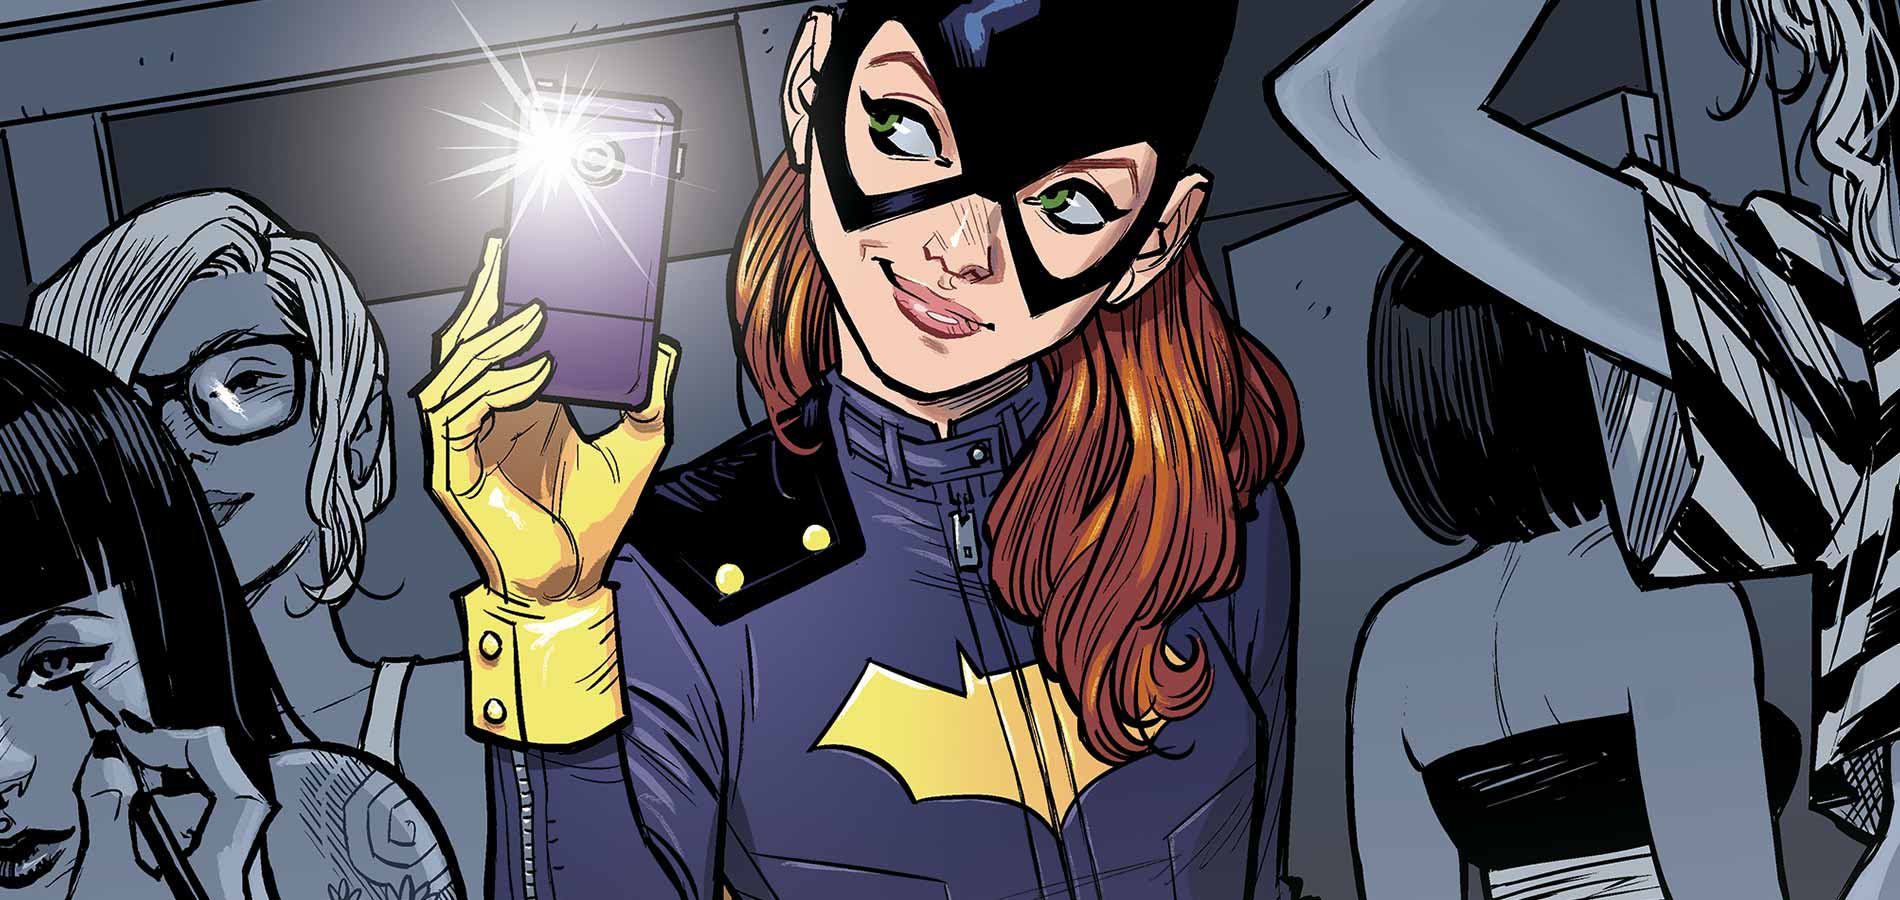 Joss Whedon to write and direct the ‘Batgirl’ solo film